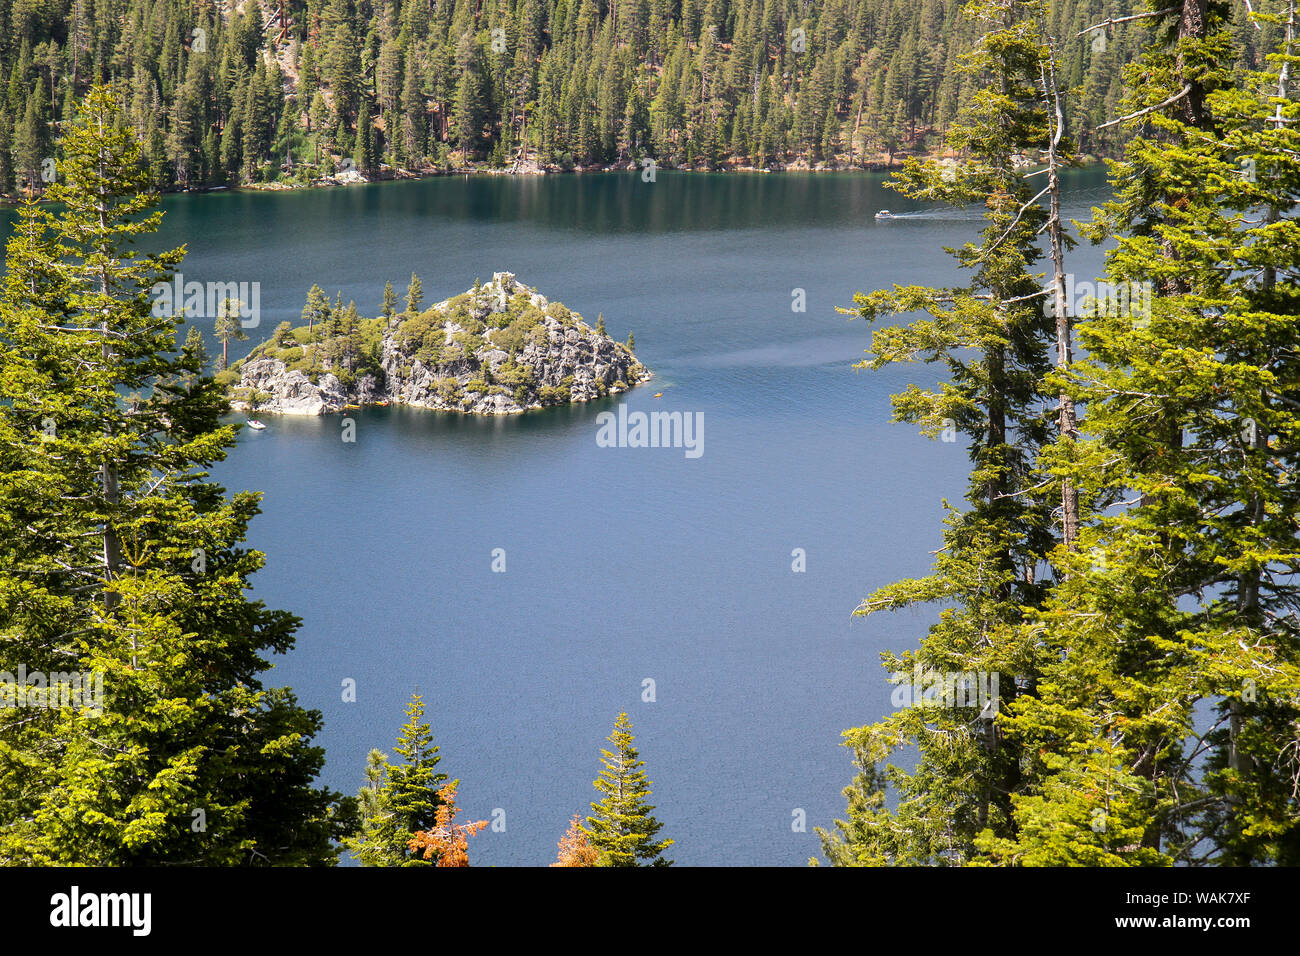 View towards Fannette Island from Inspiration Point, Emerald Bay, Lake Tahoe, California, Usa Stock Photo